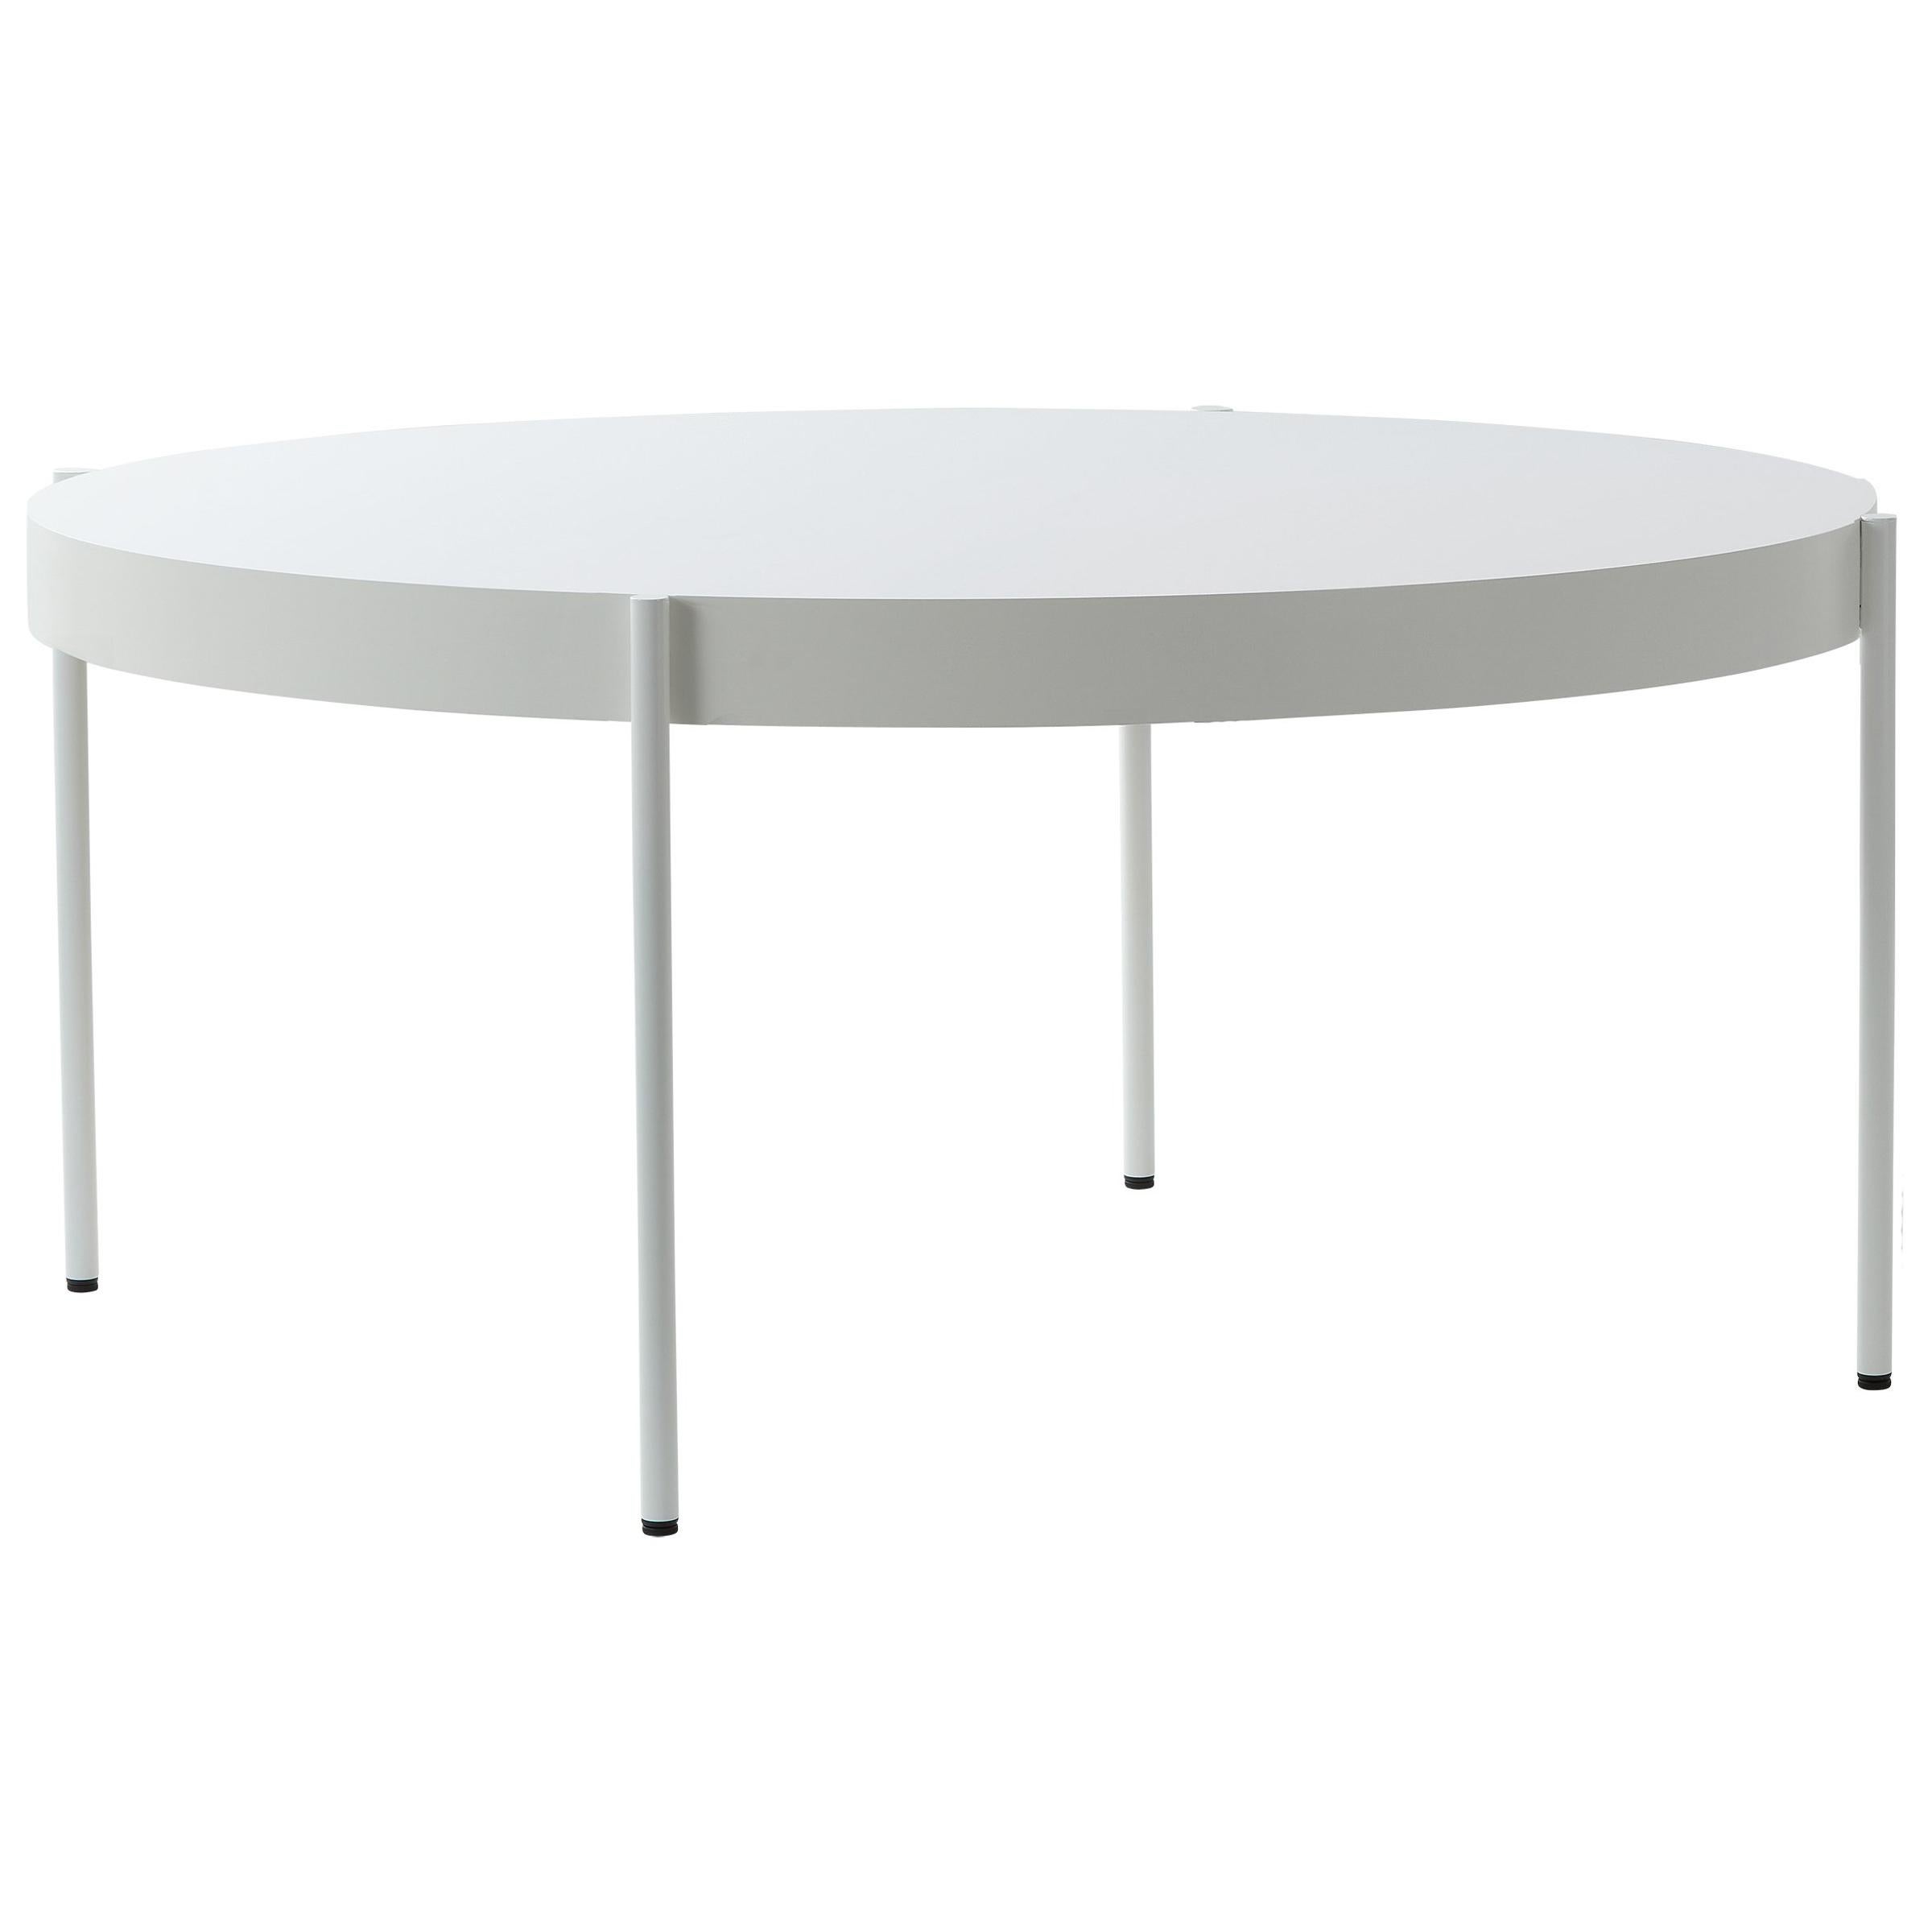 Series 430 Large Round Dining Table in White by Verner Panton For Sale